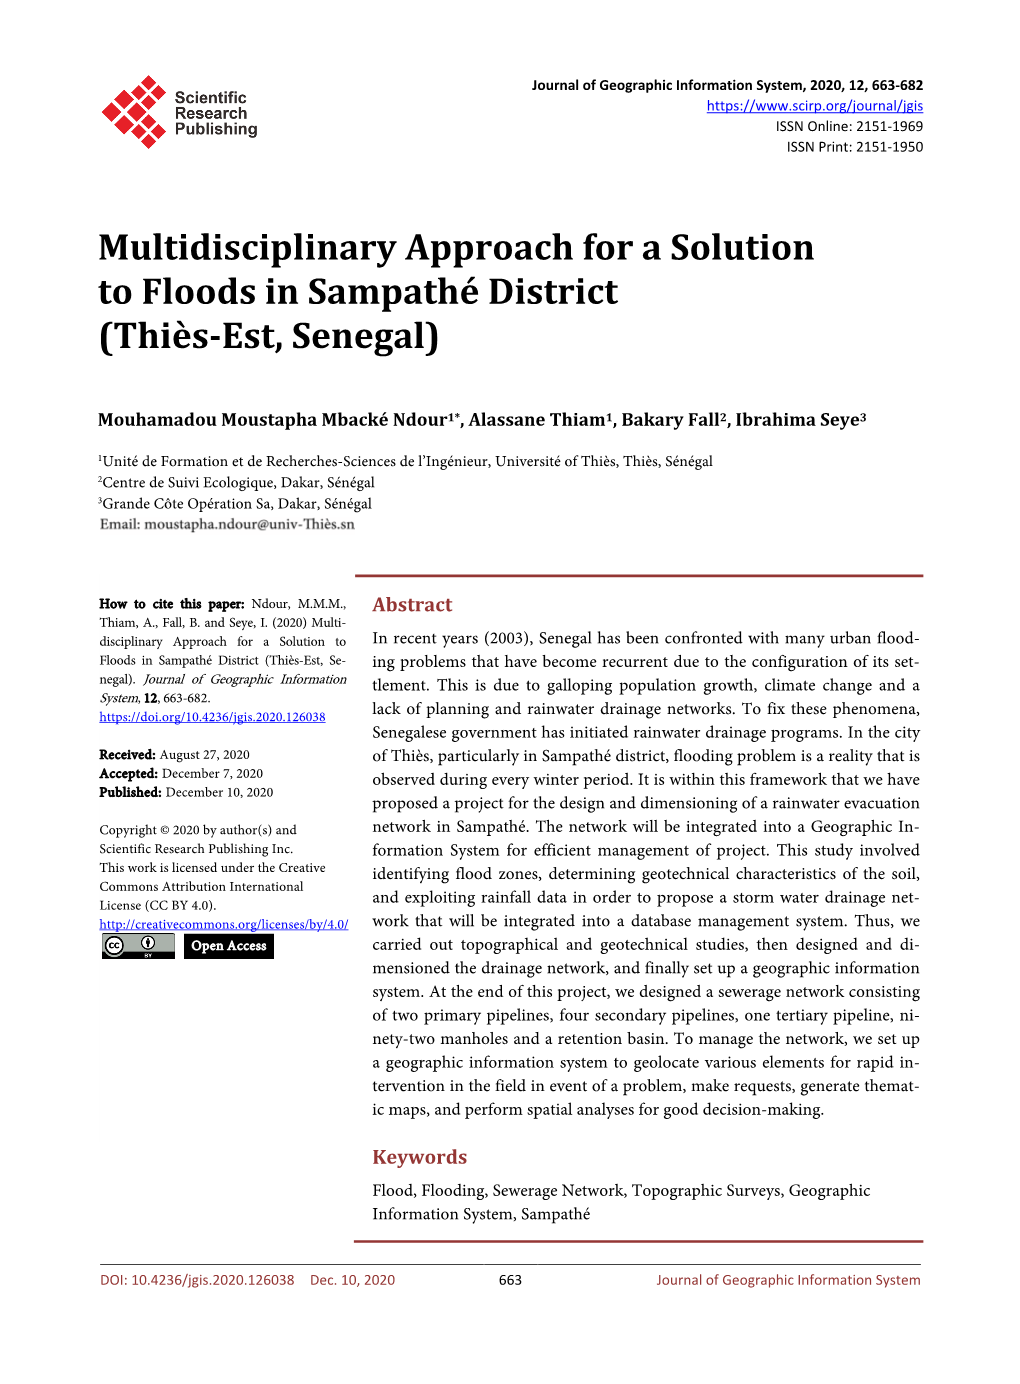 Multidisciplinary Approach for a Solution to Floods in Sampathé District (Thiès-Est, Senegal)